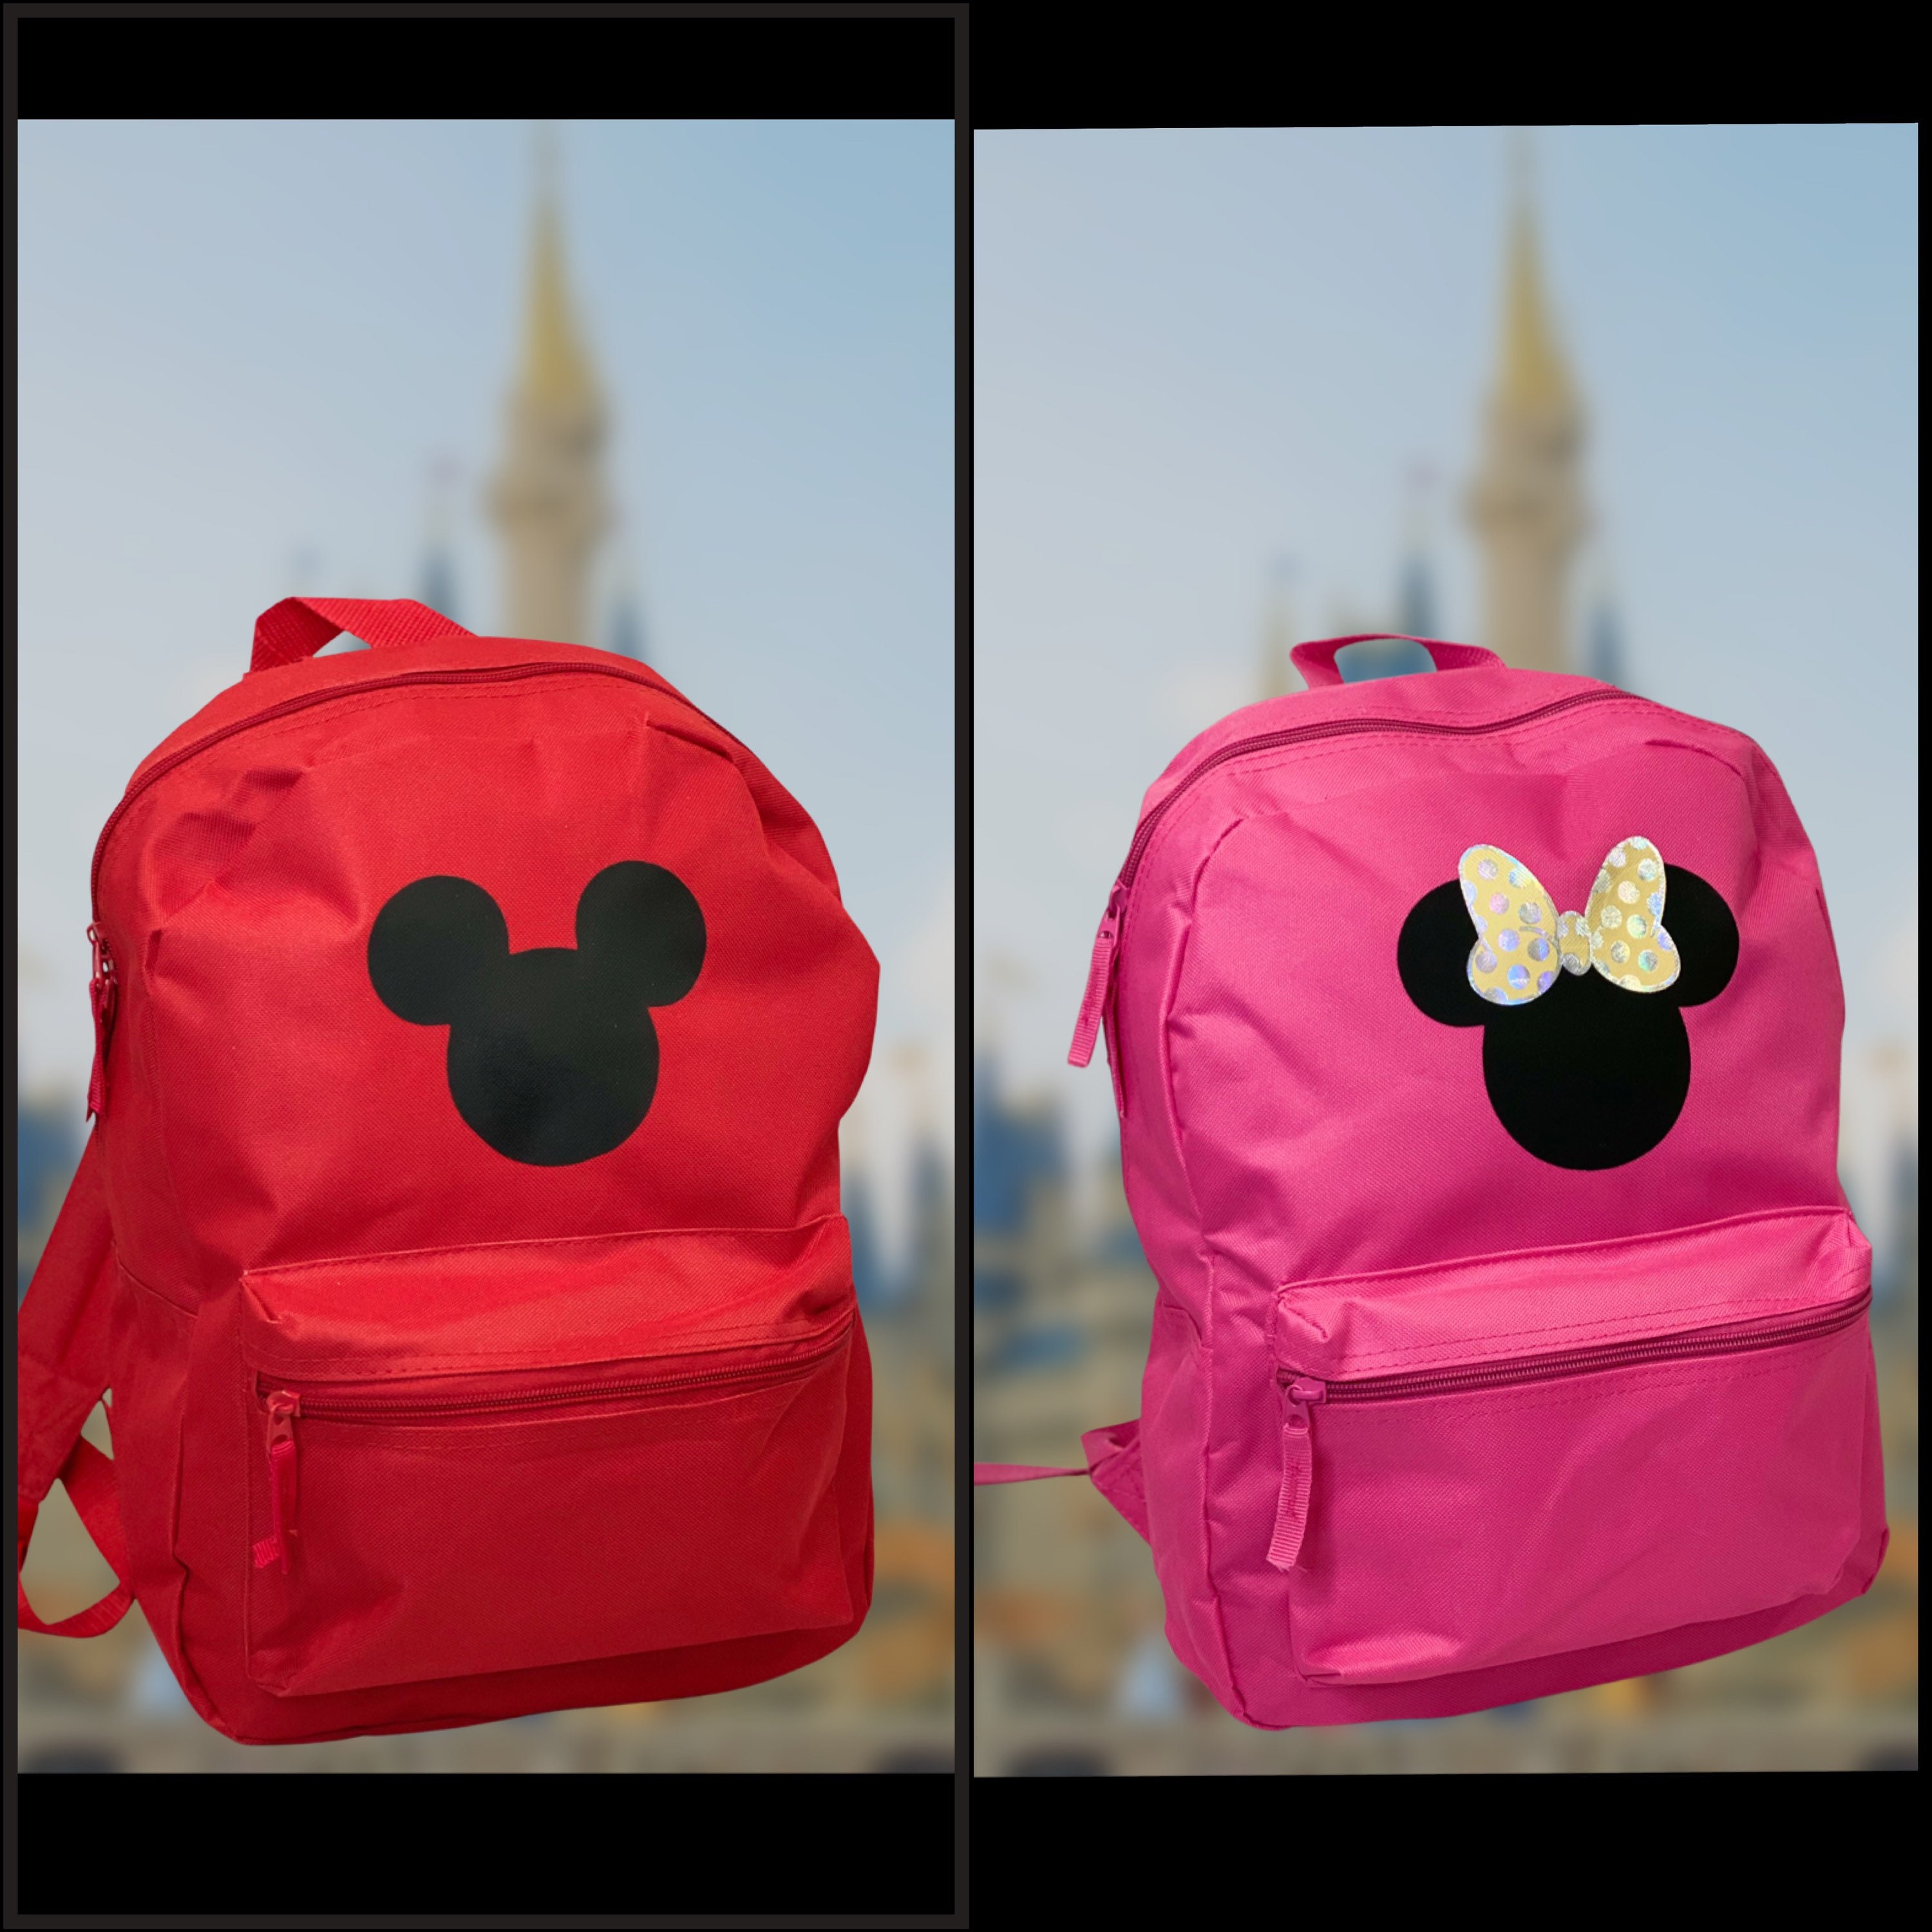 Personalized Mickey Mouse 10 Inch Mini Backpack with Harness – Kishkesh